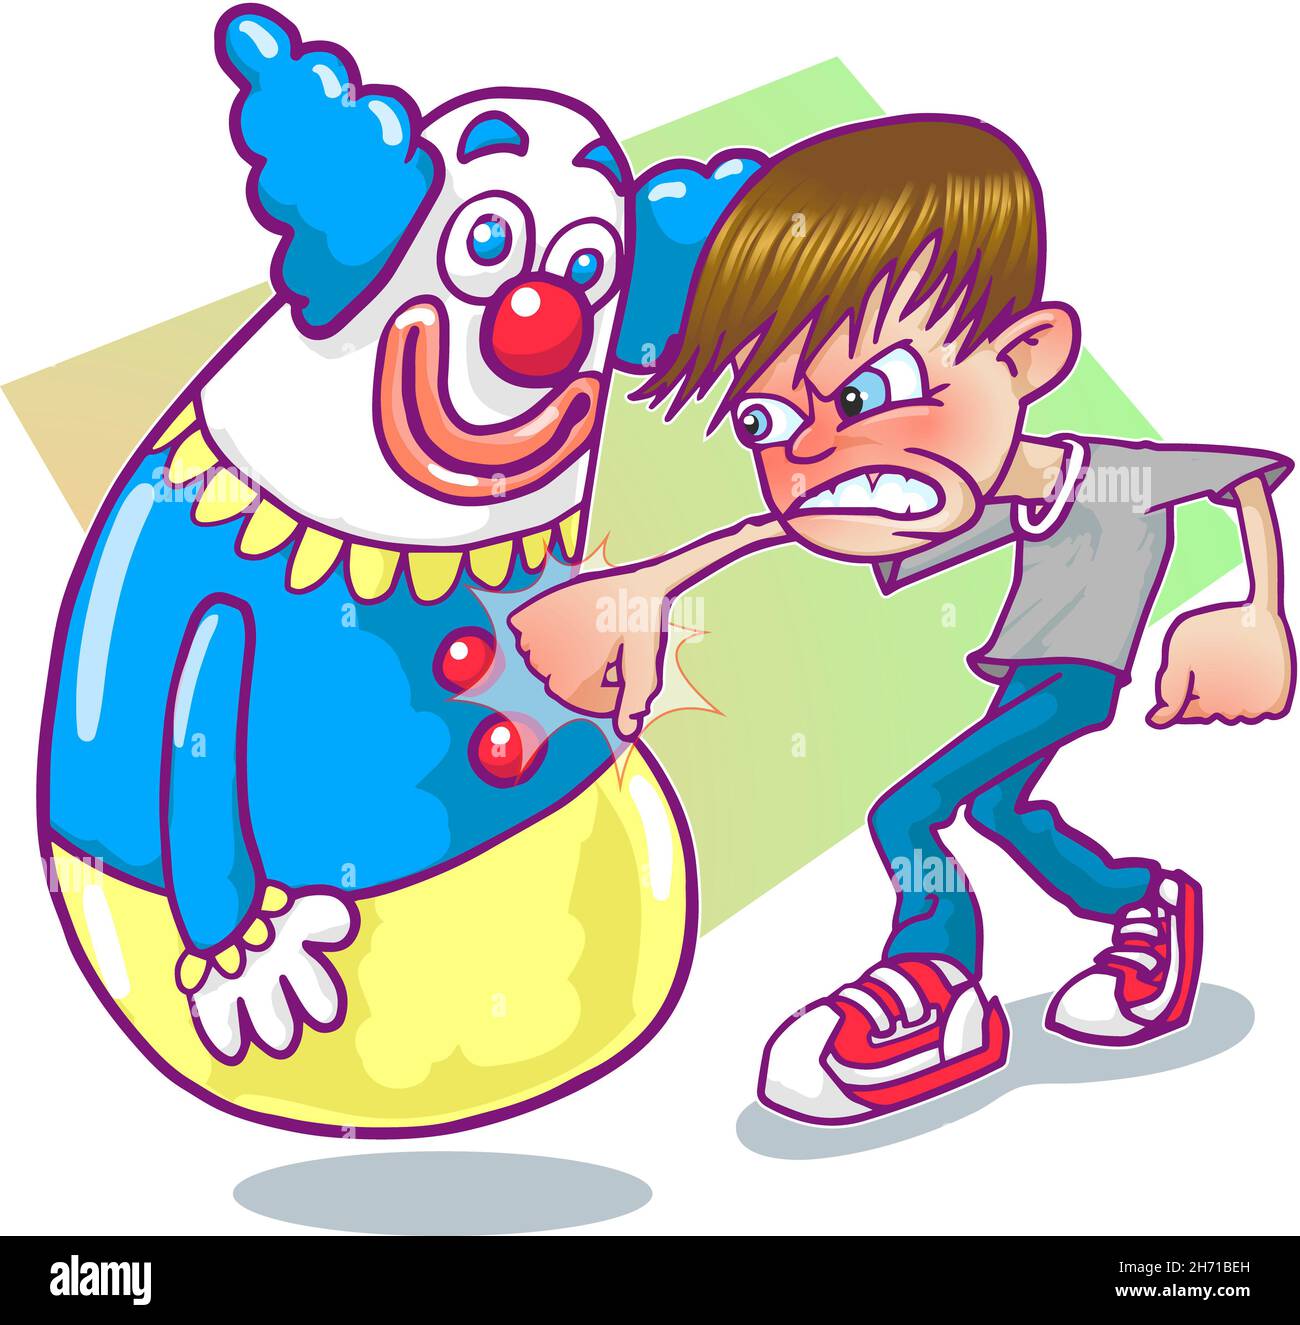 The Bobo Doll Experiment 1960’s Art Illustration of the psychological study on aggression led by Albert Bandura showing children copy adults' violence Stock Photo